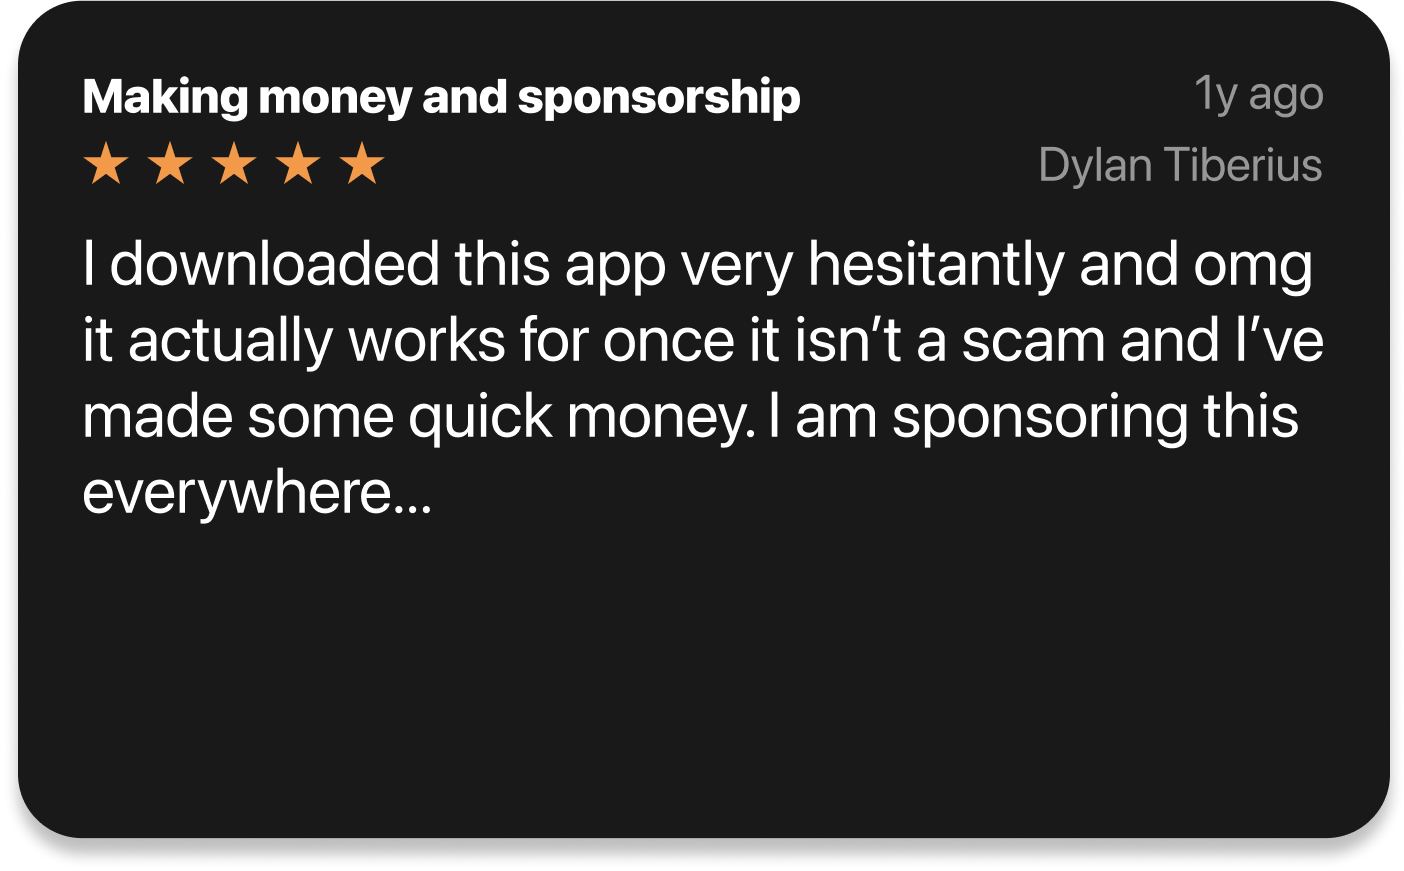 I downloaded this app very hesitantly and omg it actually works for once it isn’t a scam and I’ve made some quick money. I am sponsoring this everywhere...